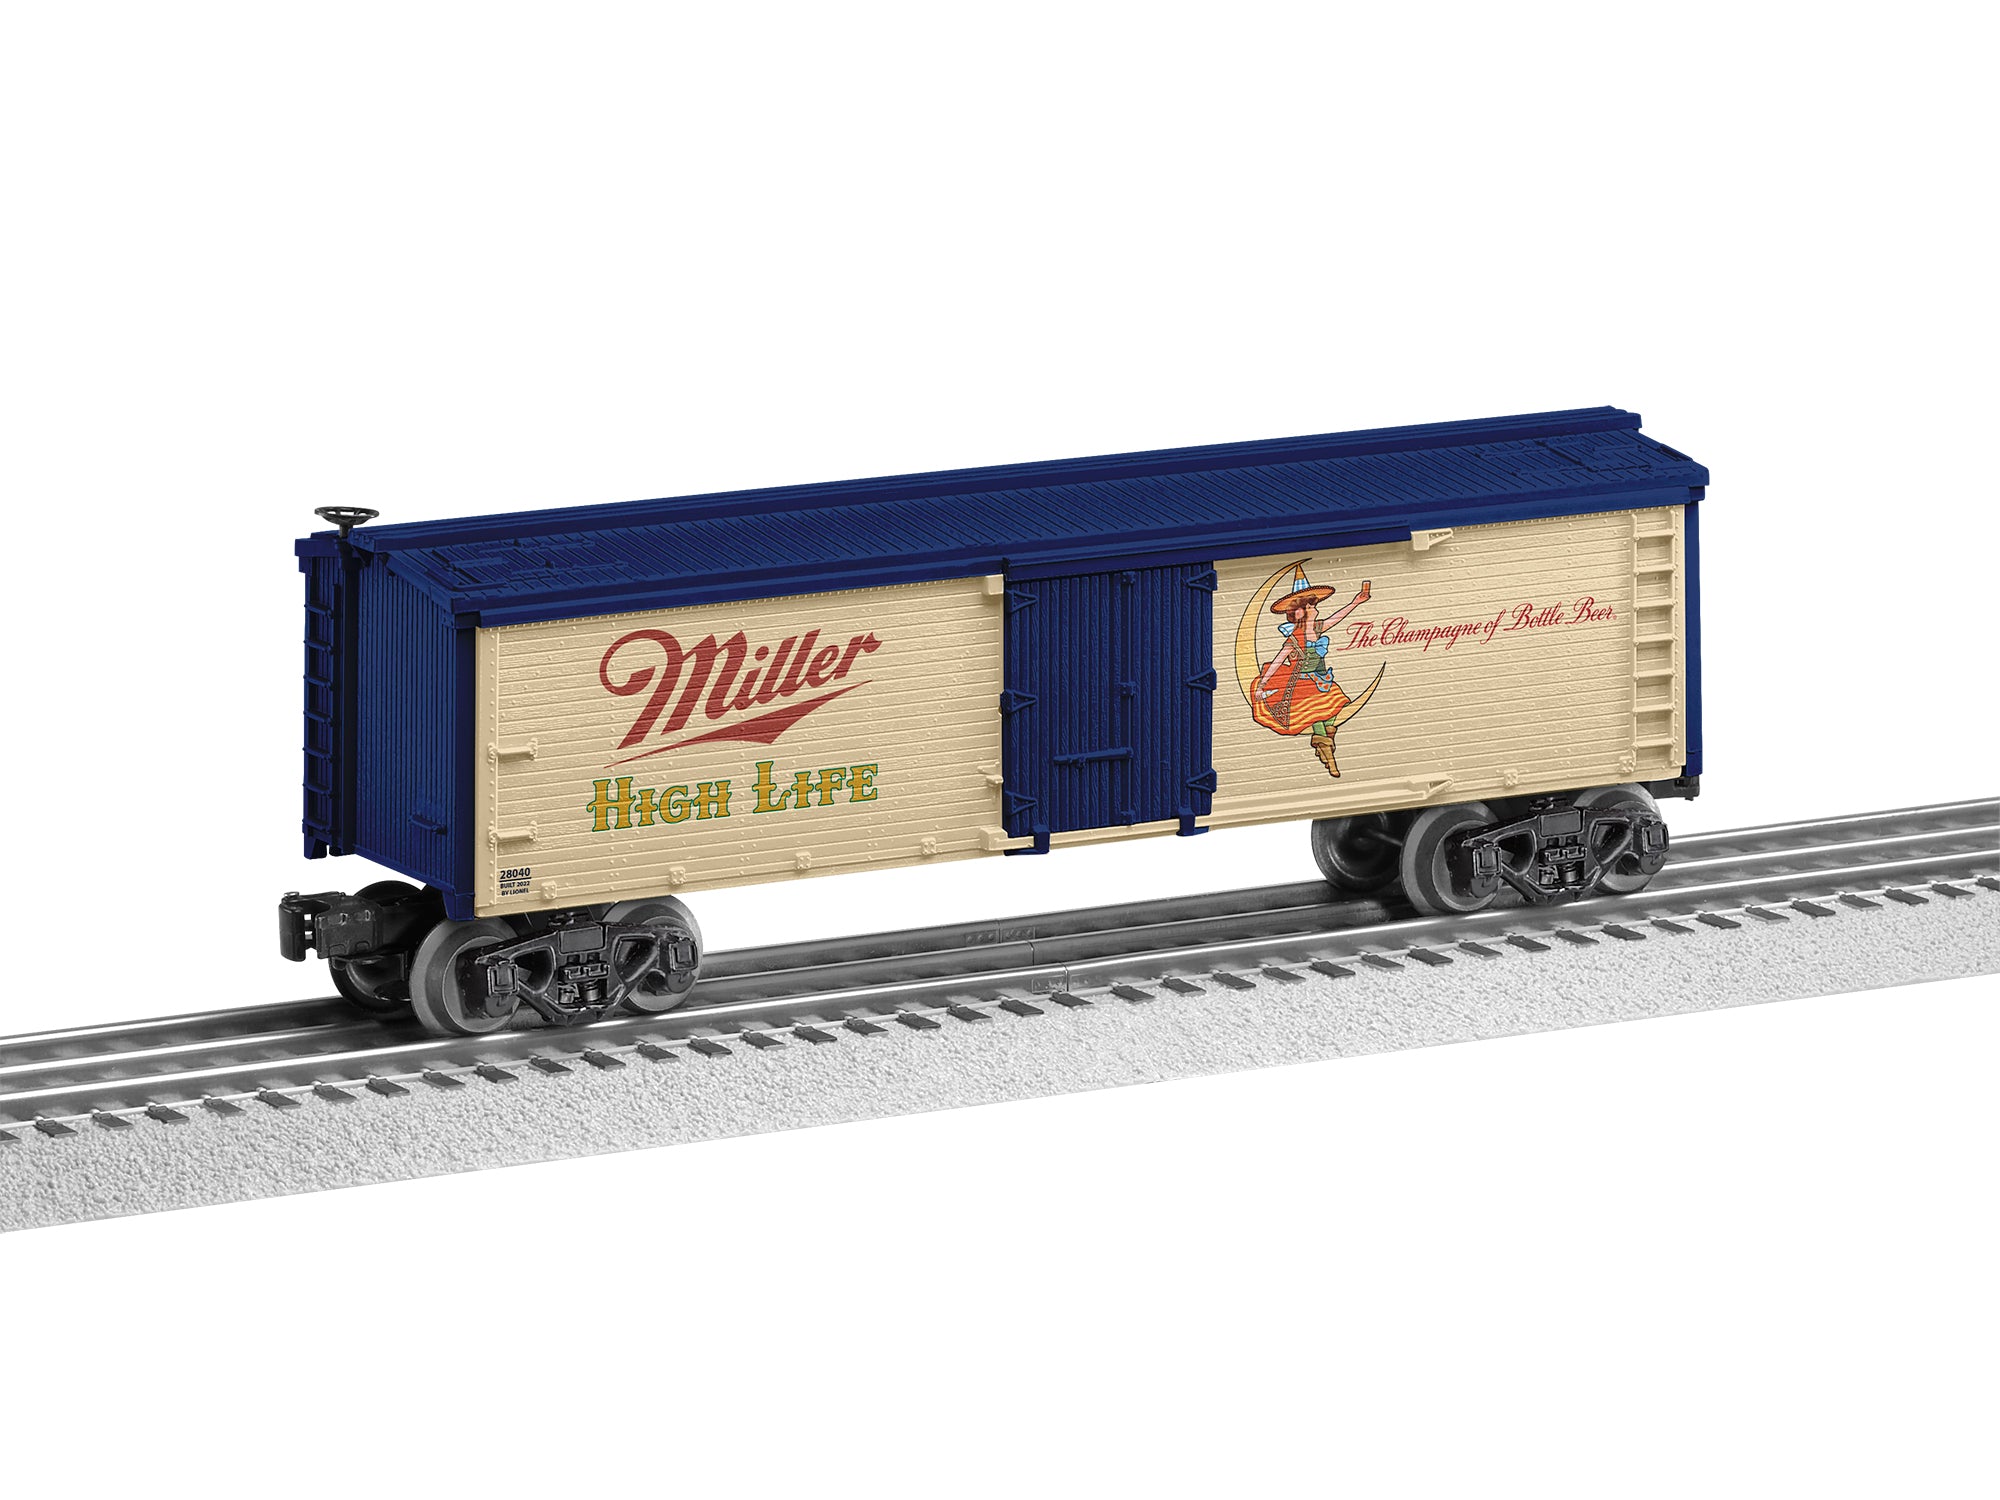 Lionel 2228060 - Coors Brewing Company - Reefer Car "Miller"